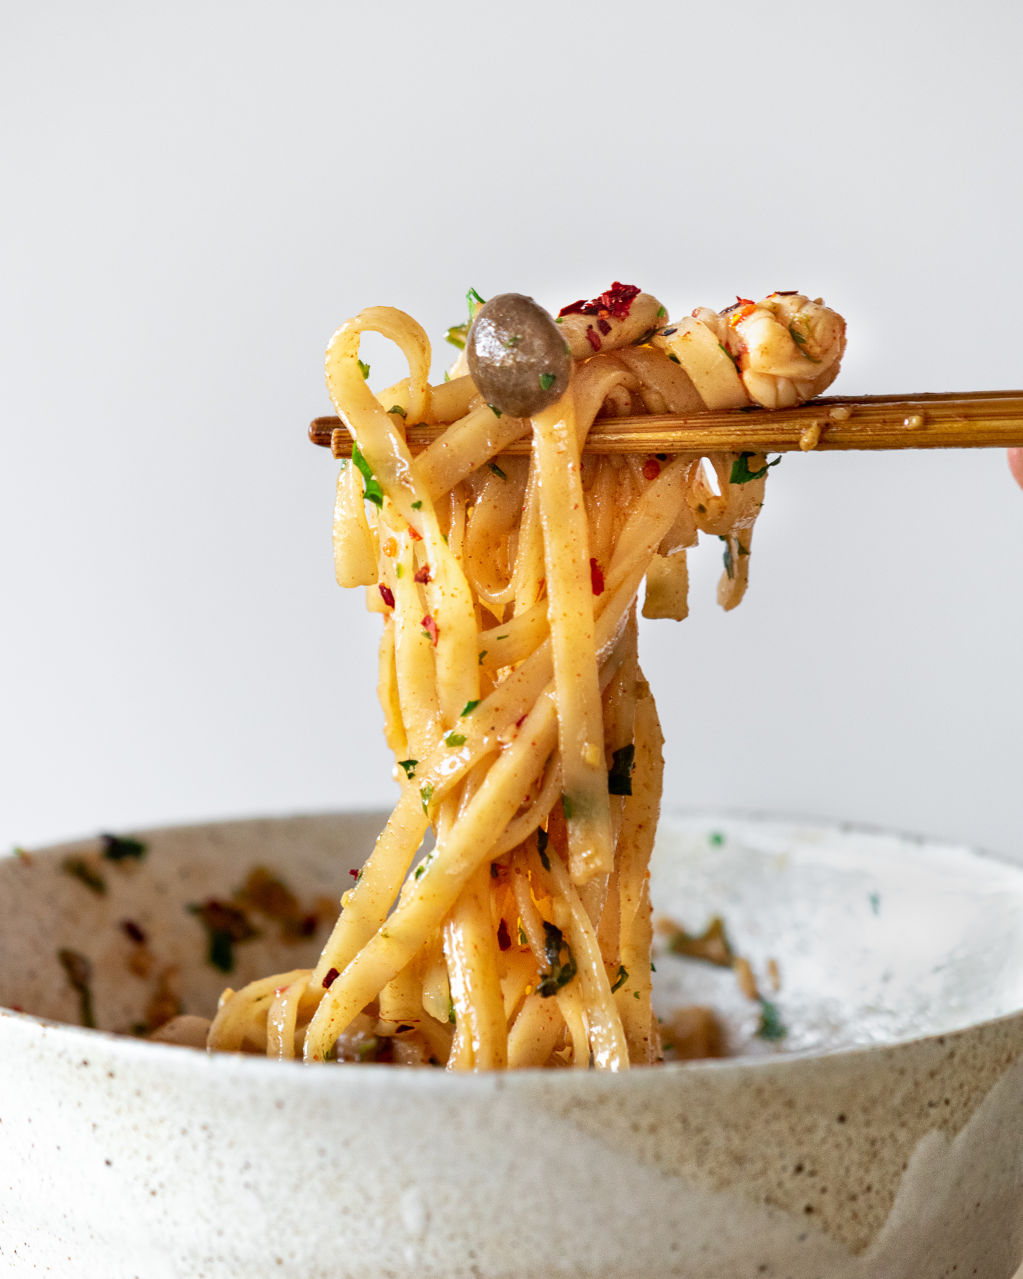 Chili oil noodles amb gambes i enokis